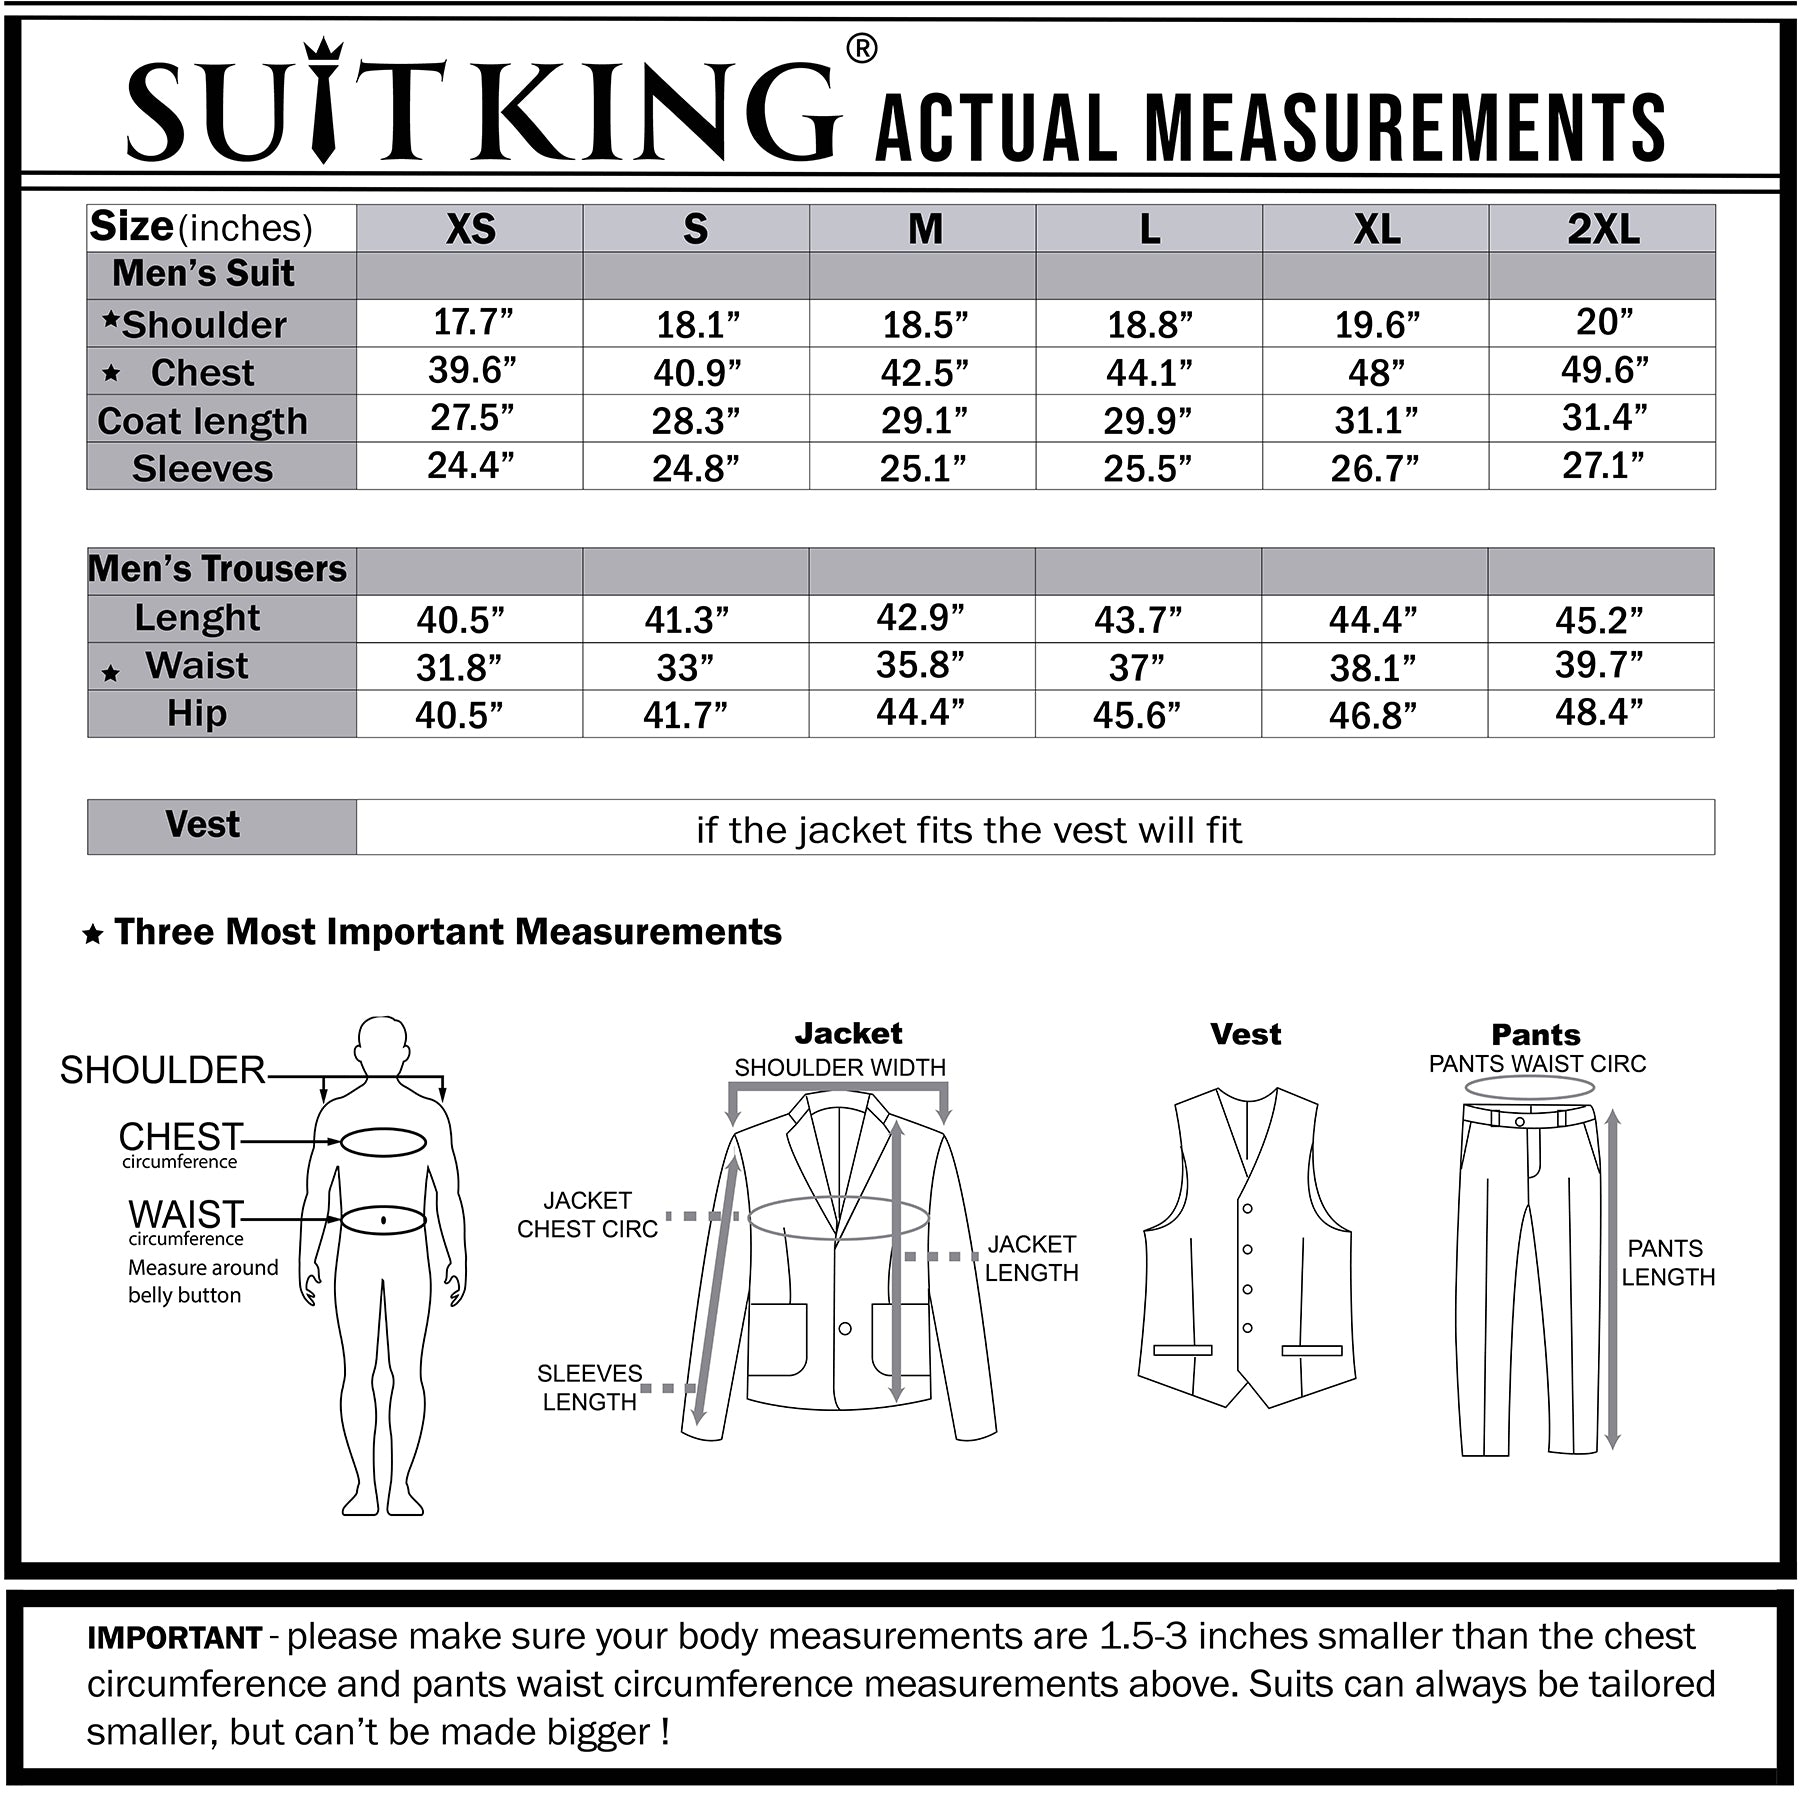 Suit King - 3  Piece Men's Suit, Slim Fit Stylish Jacket, Pants, Vest, 2 Ties, and Belt, Perfect for Weddings, Business and More | Black